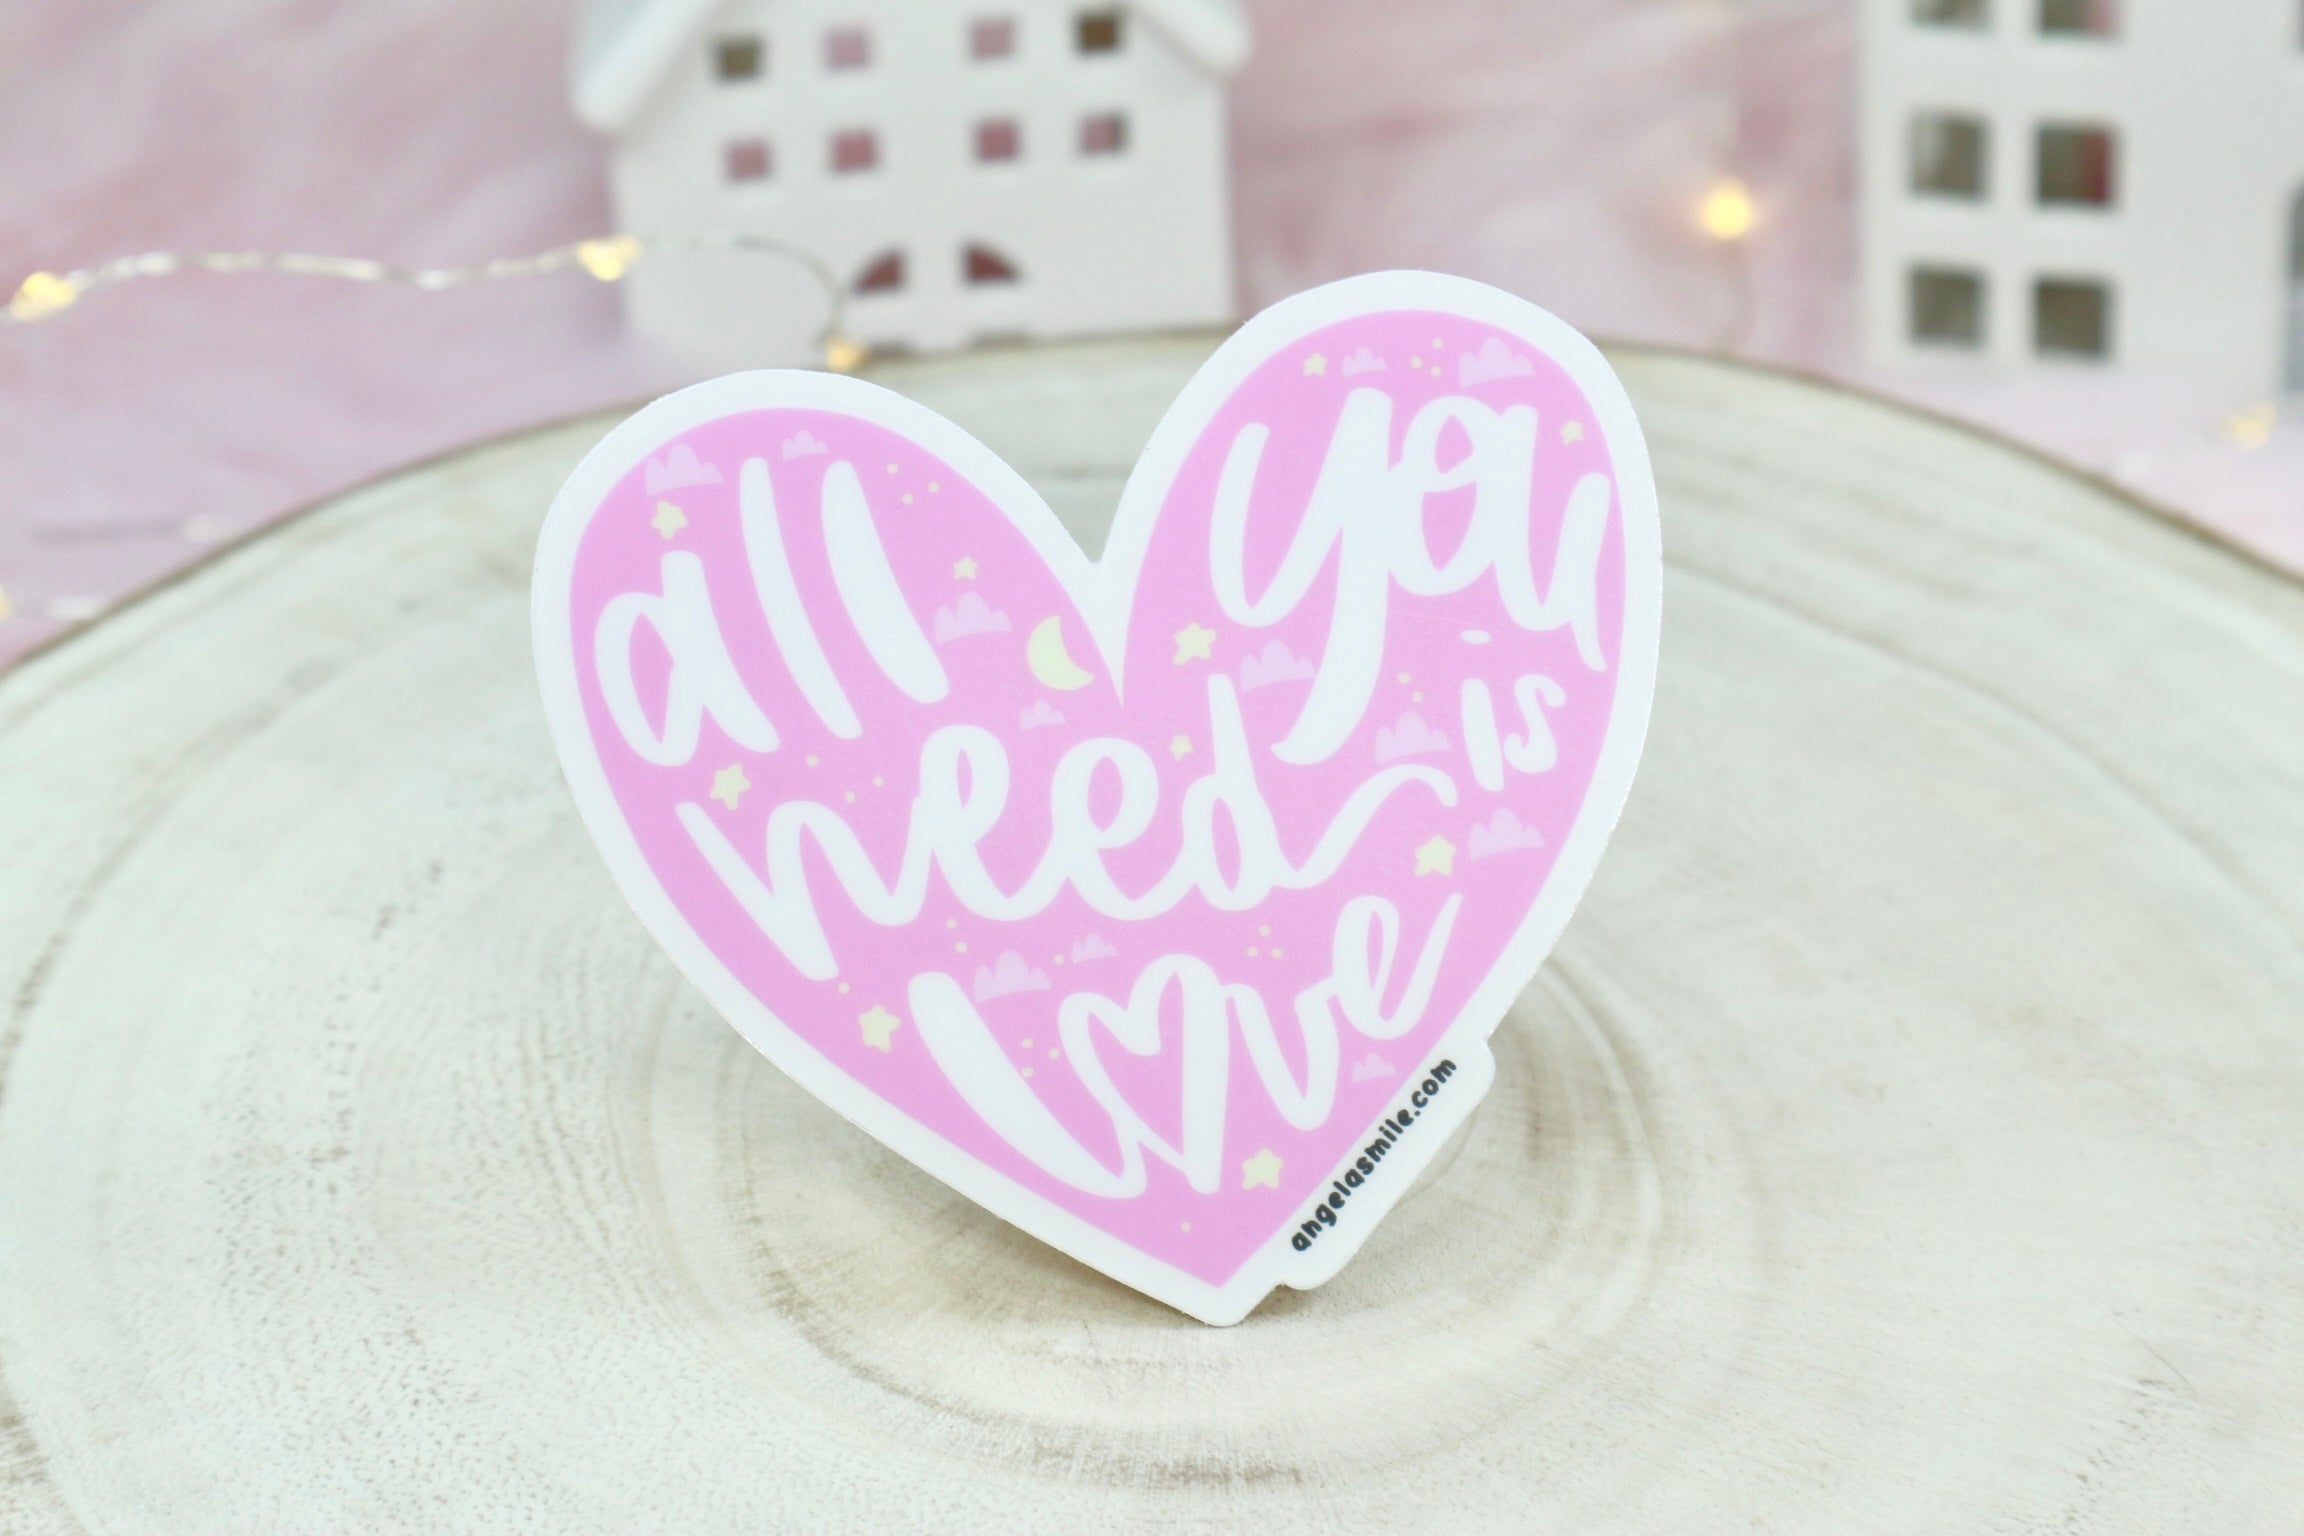 CLEAR STICKER cuore - all you need is love